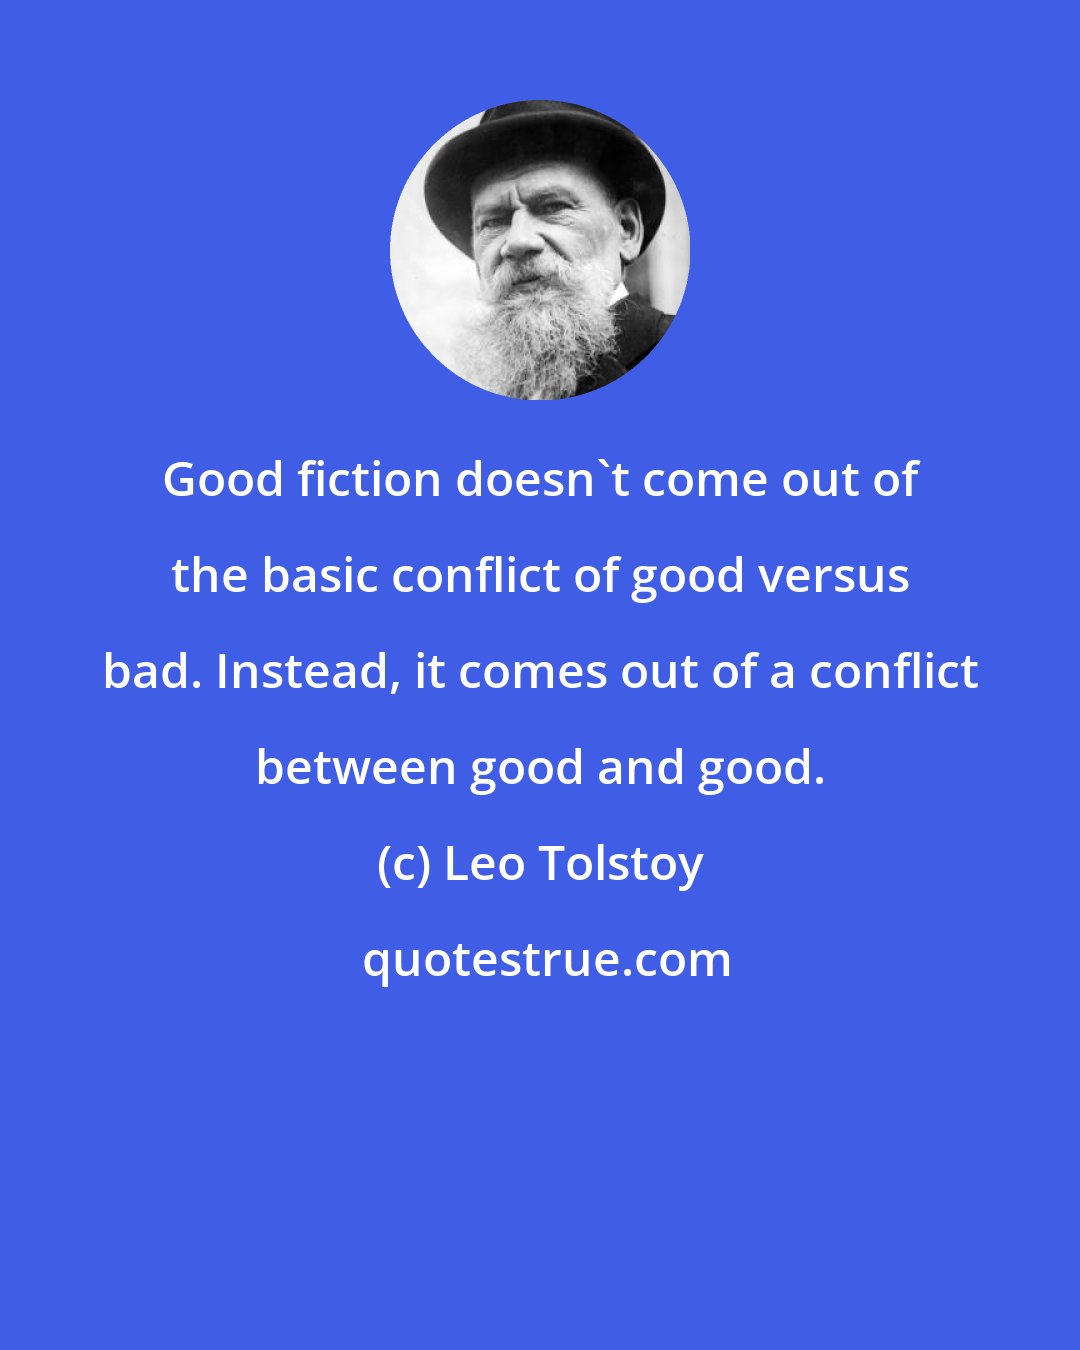 Leo Tolstoy: Good fiction doesn't come out of the basic conflict of good versus bad. Instead, it comes out of a conflict between good and good.